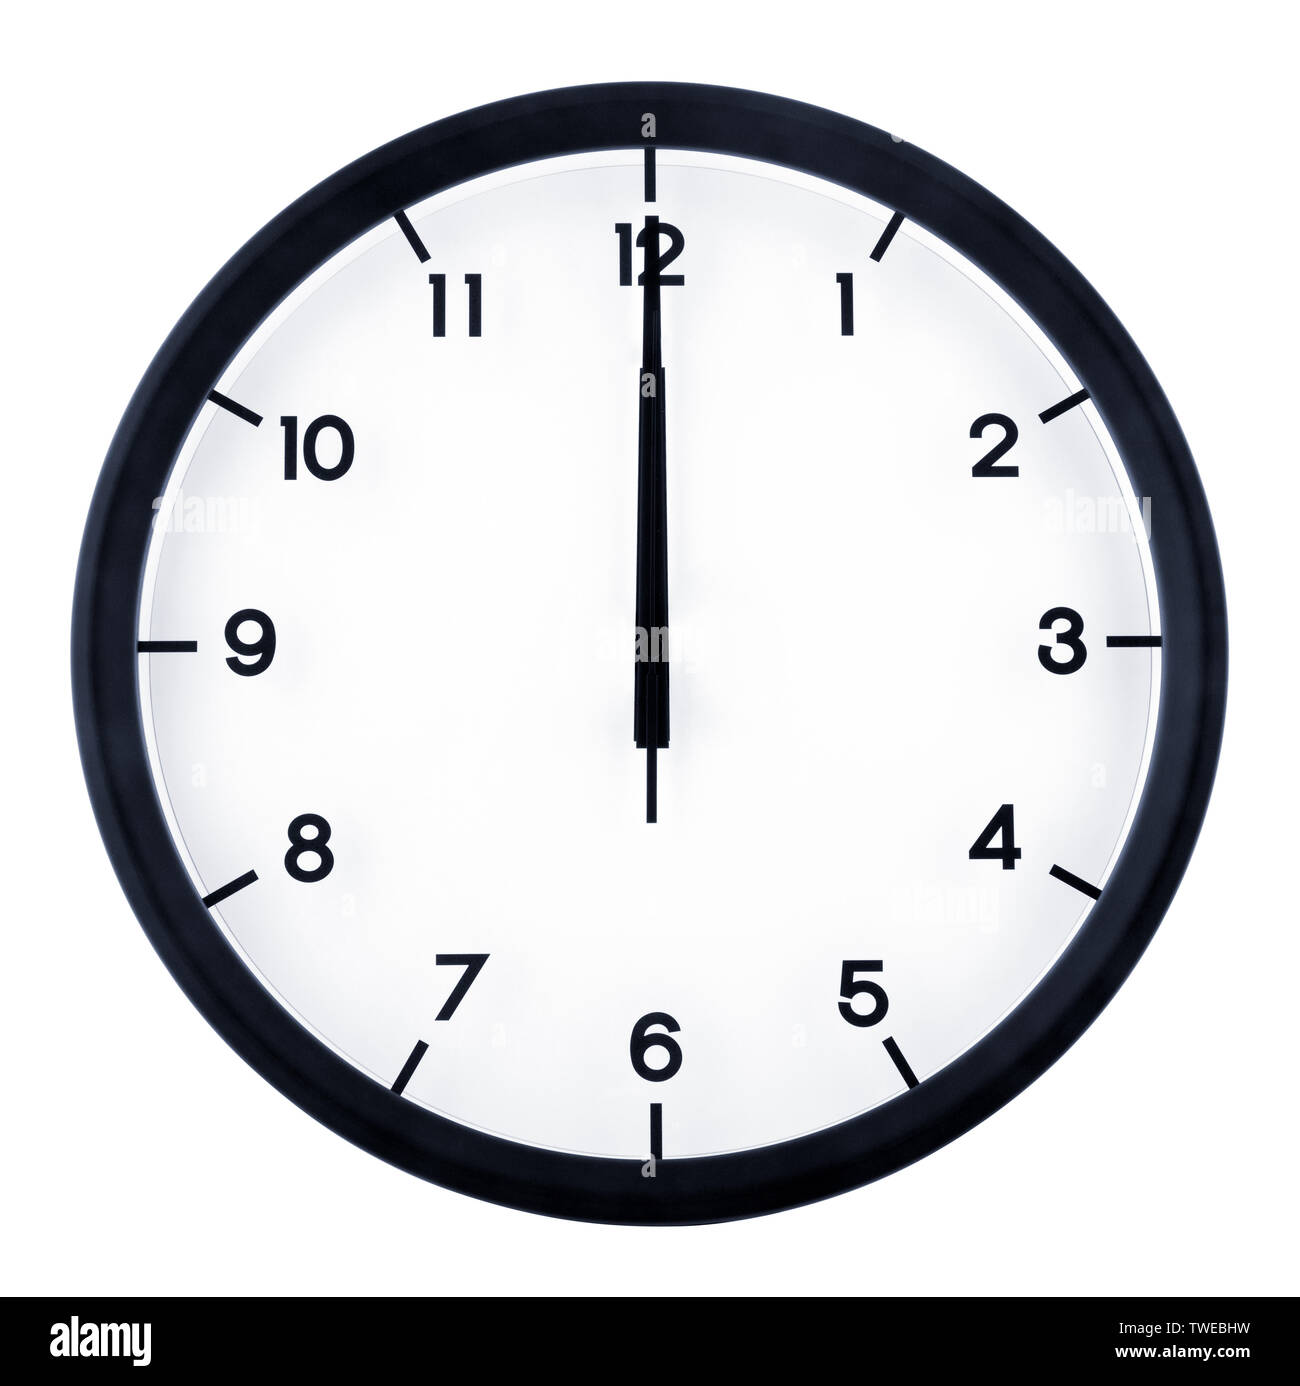 Classic analog clock pointing at 12 o'clock, isolated on white